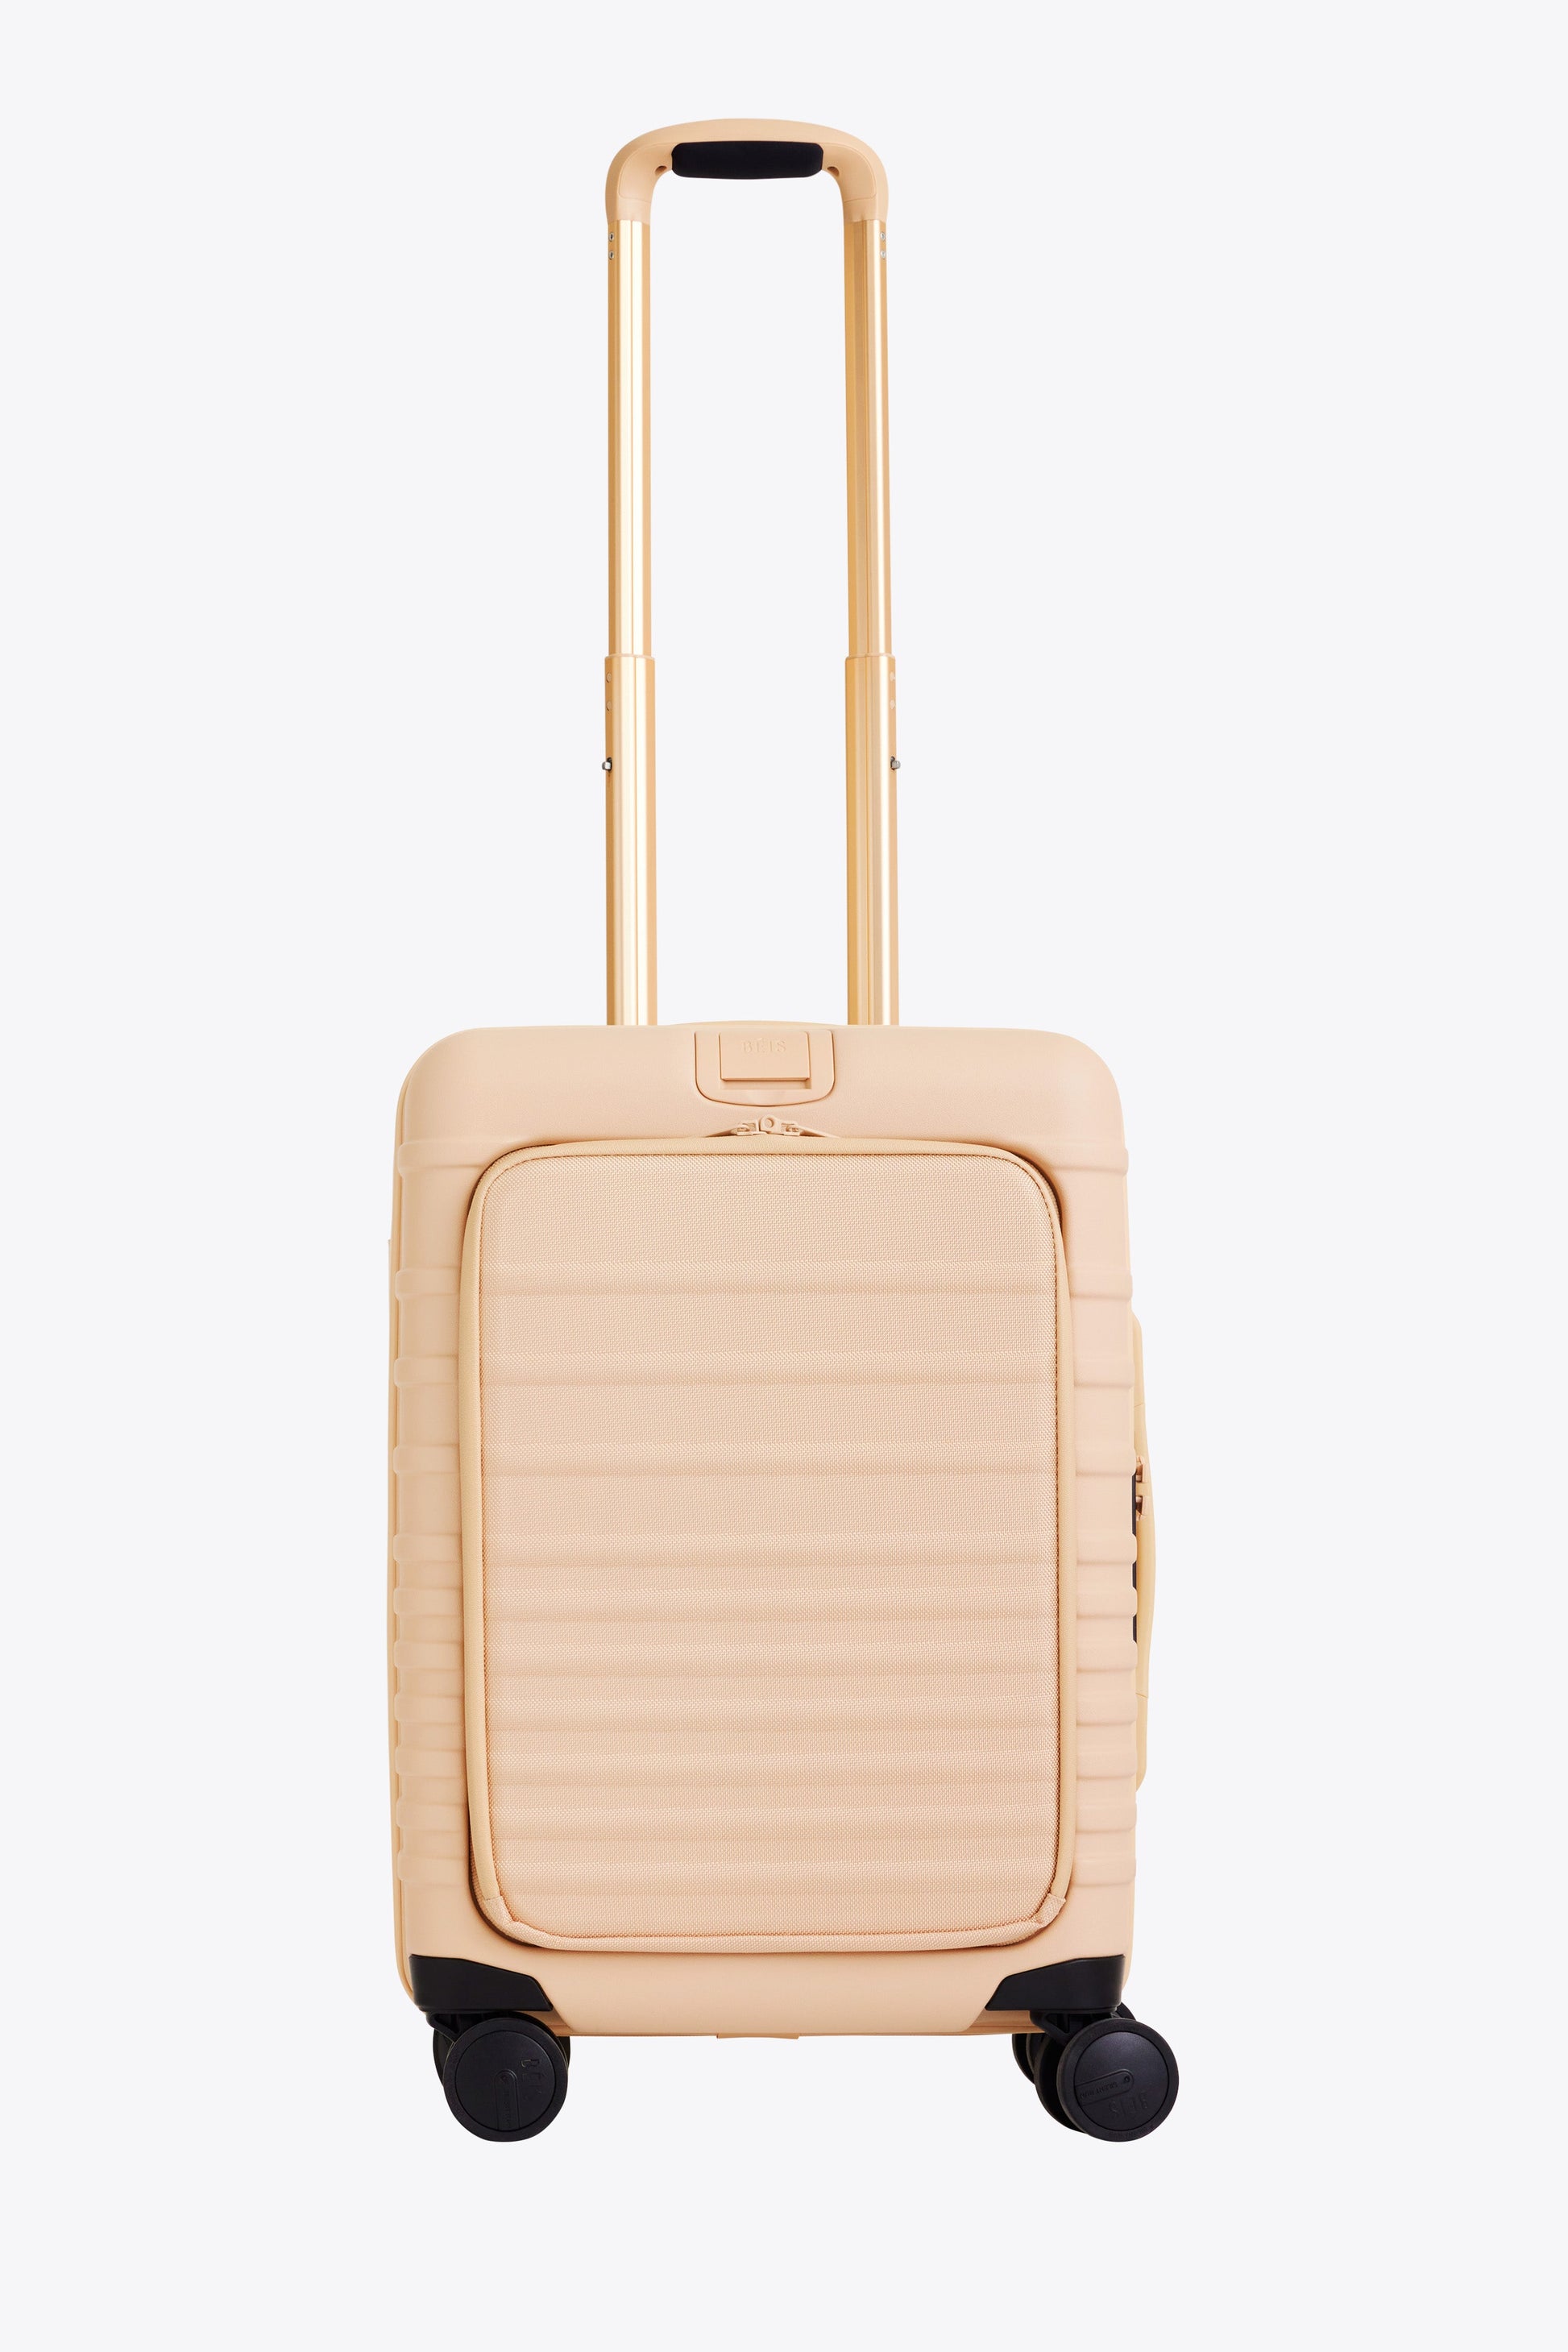 Carry-on Luggage, Suitcase Case